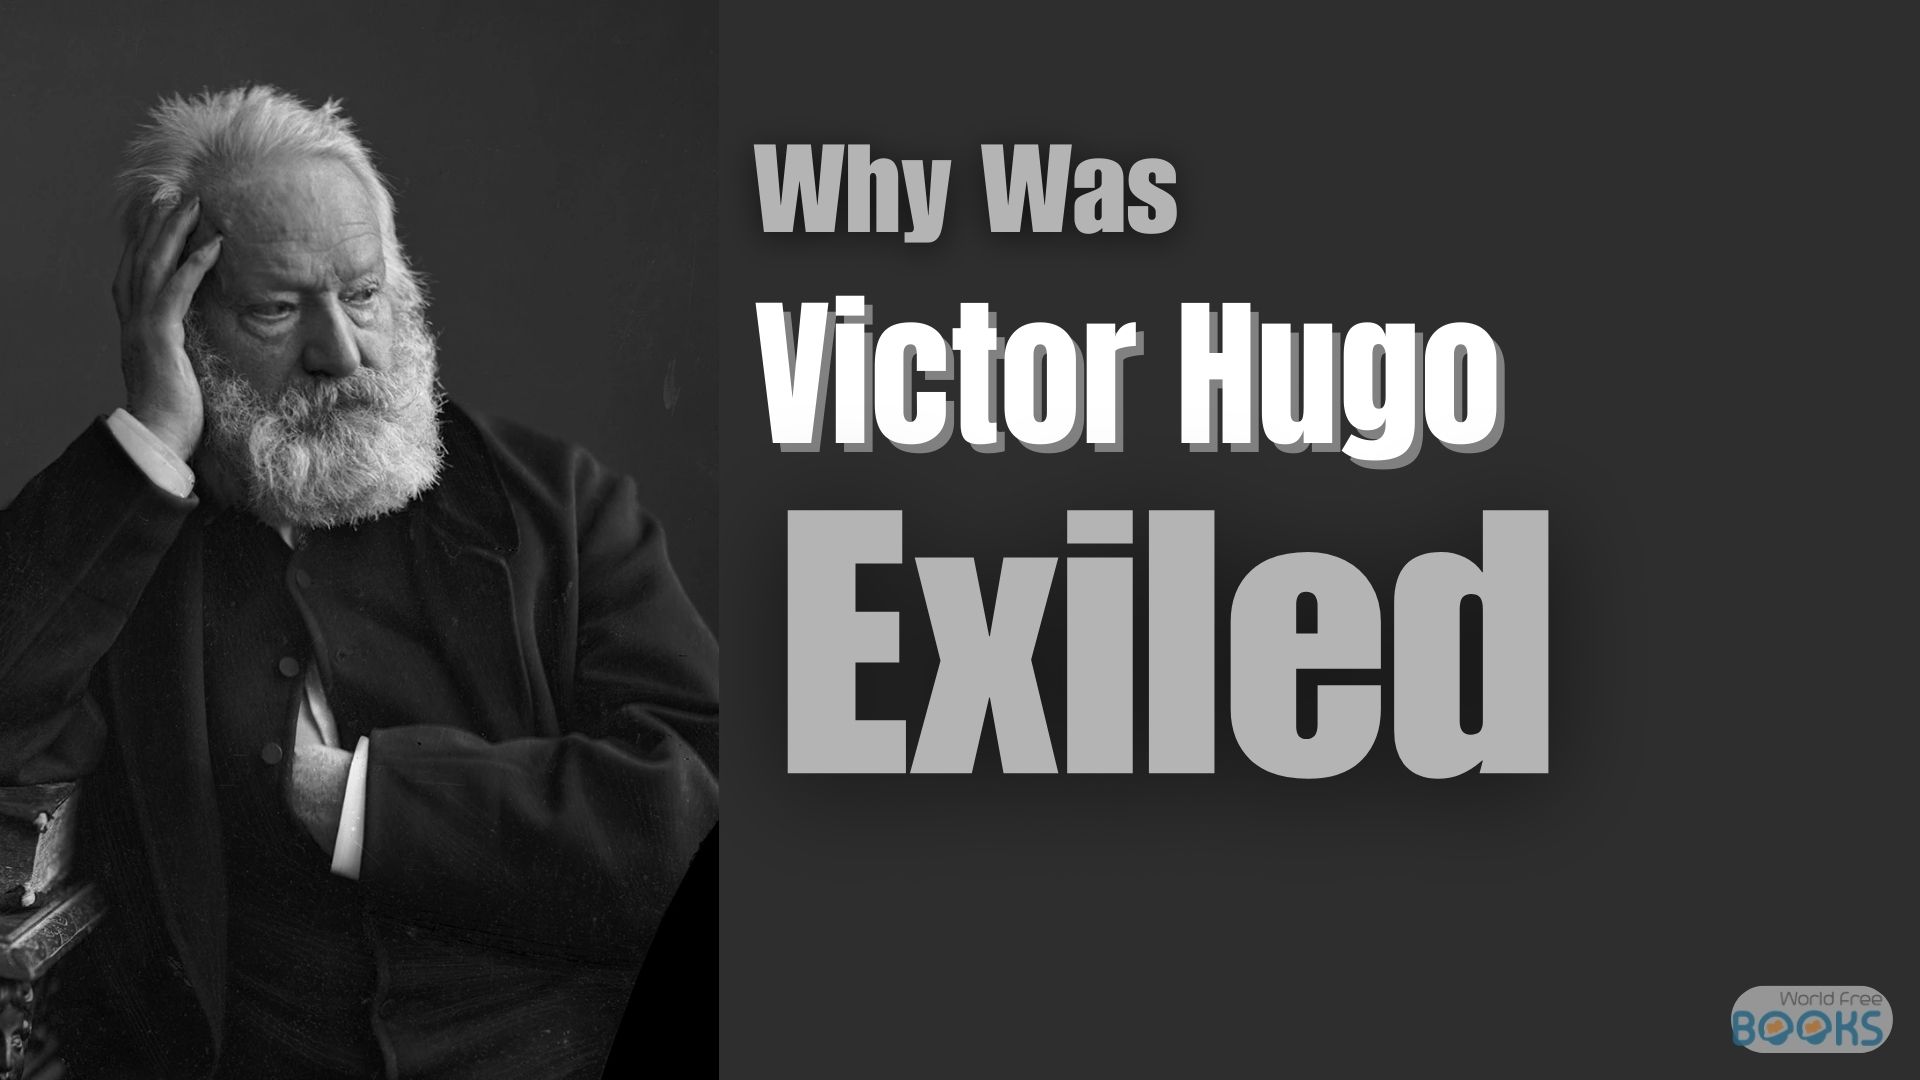 Why Was Victor Hugo Exiled?